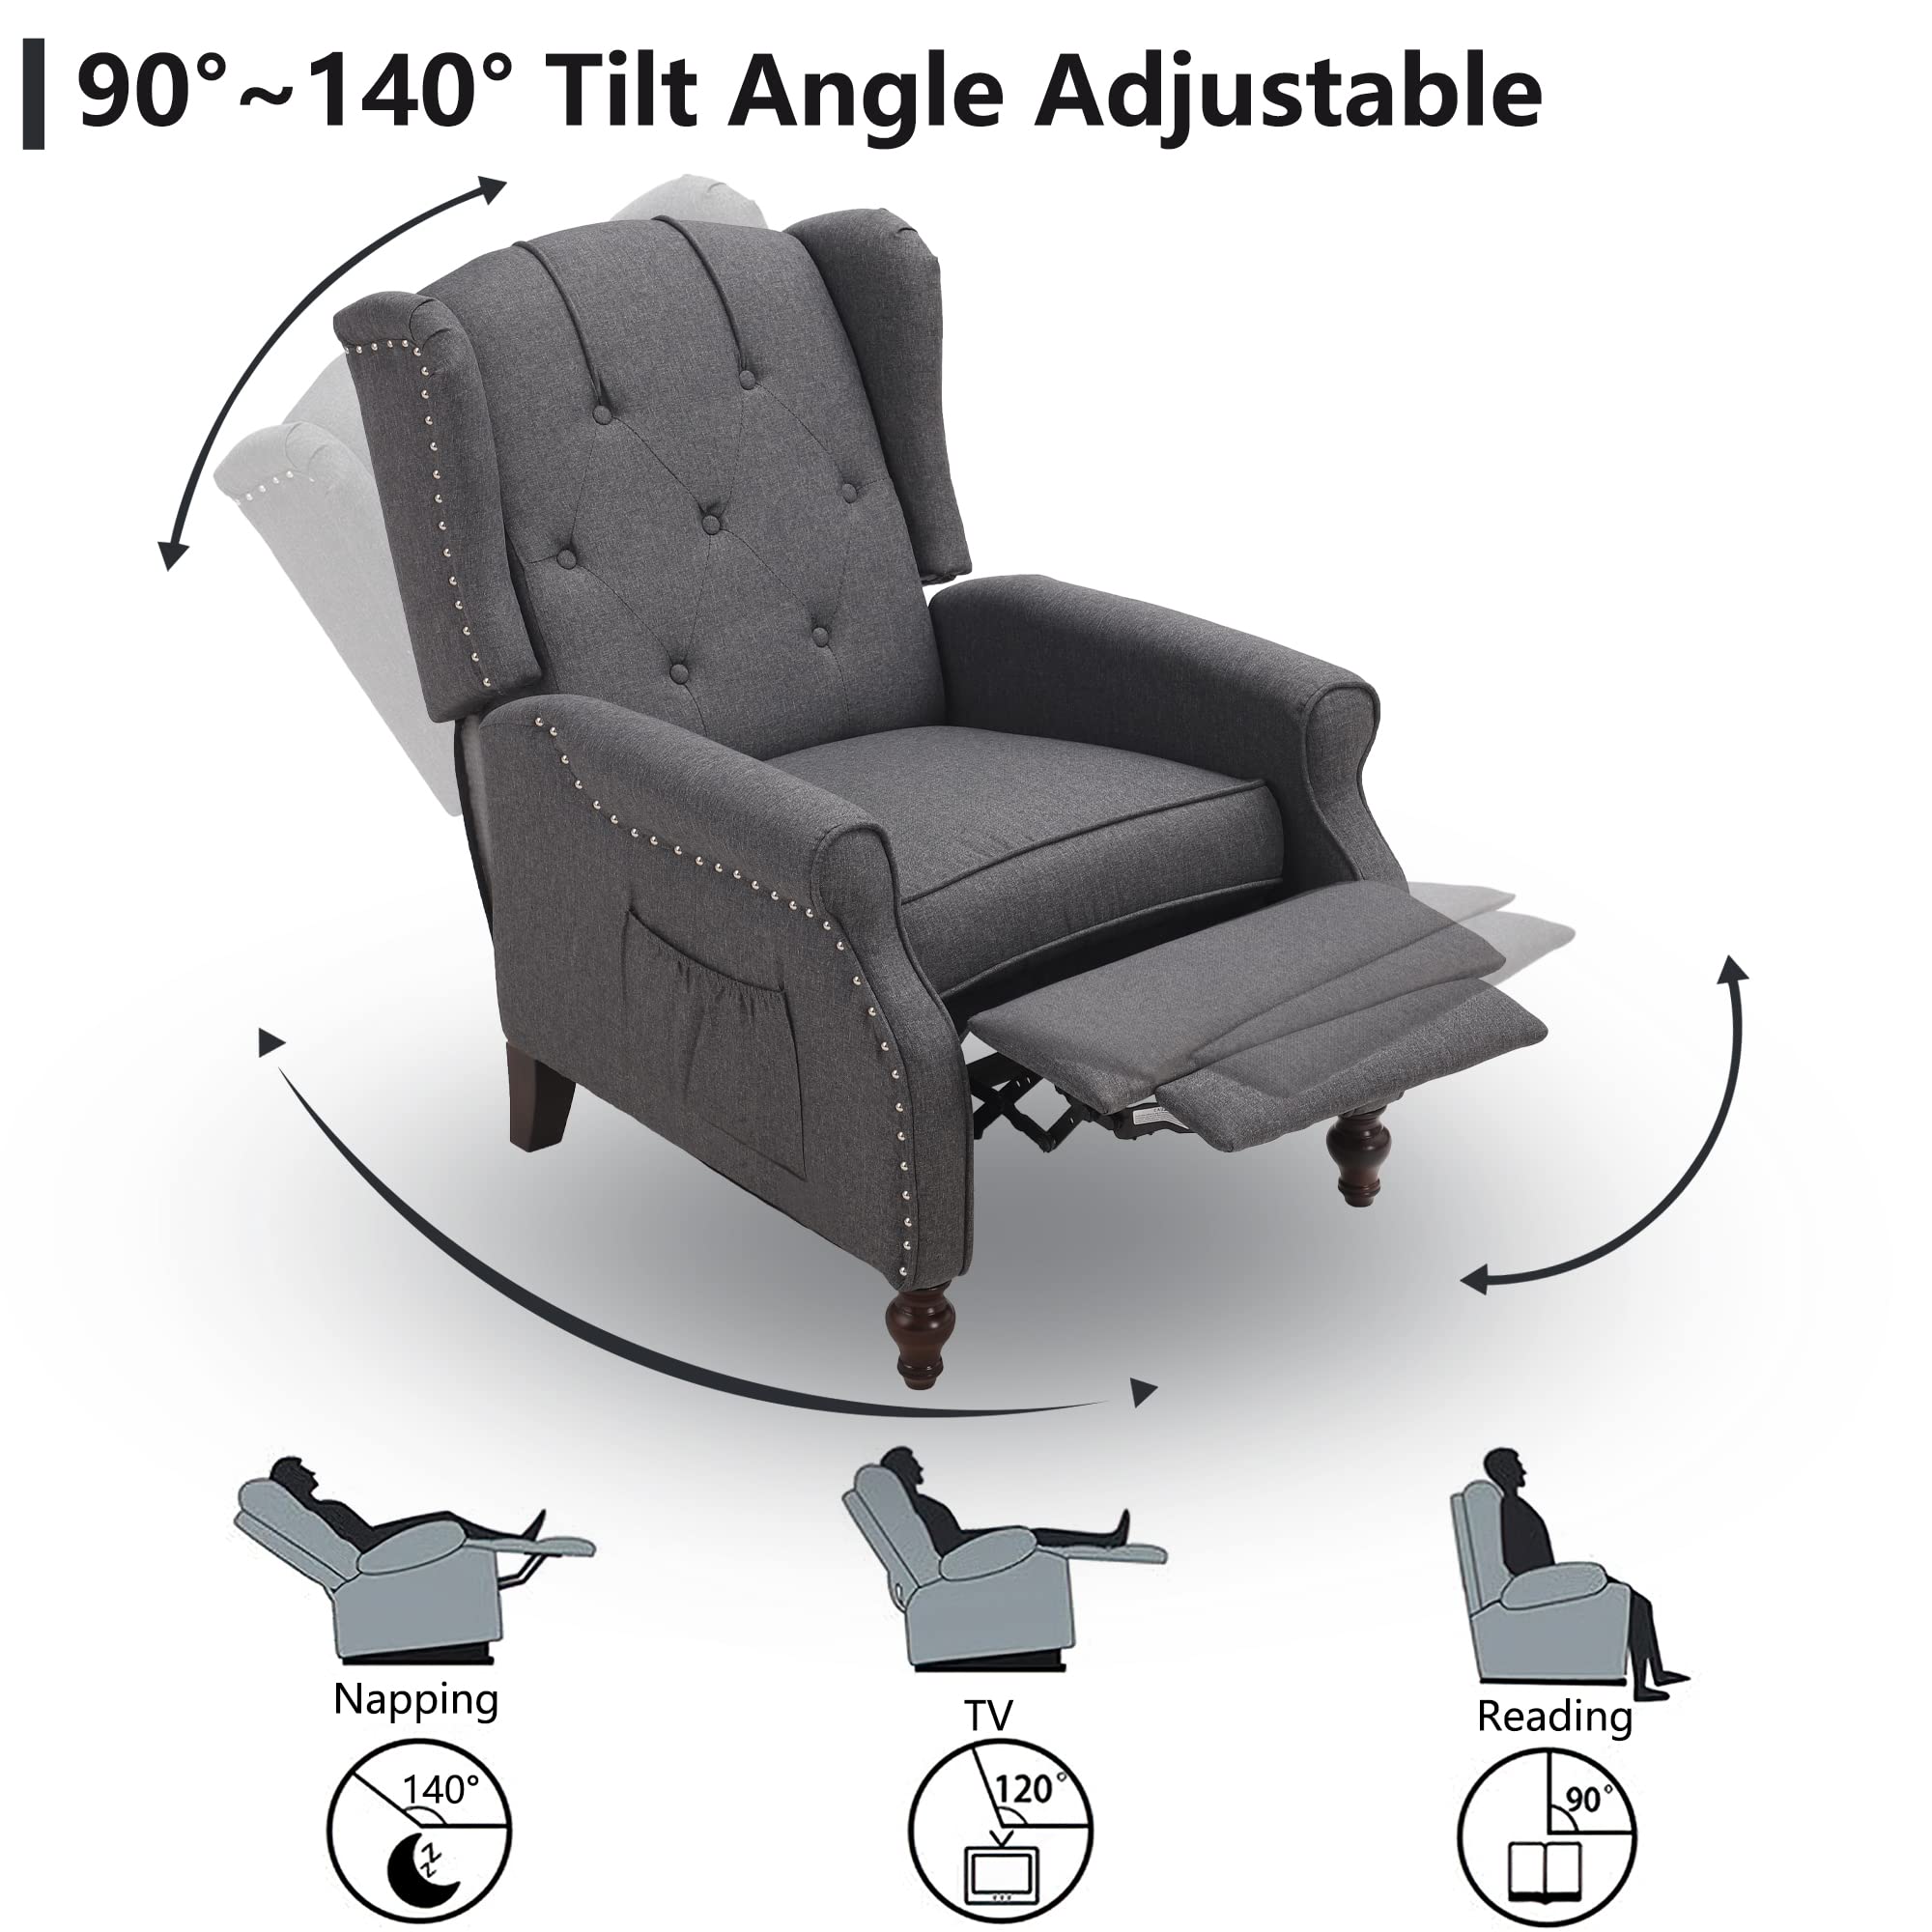 Consofa Wingback Recliner Chair with Massage and Heat Tufted Fabric Push Back Arm Chair for Living Room Vintage Recliner Chair with Remote Control, Padded Cushion, Backrest, Wooden Legs